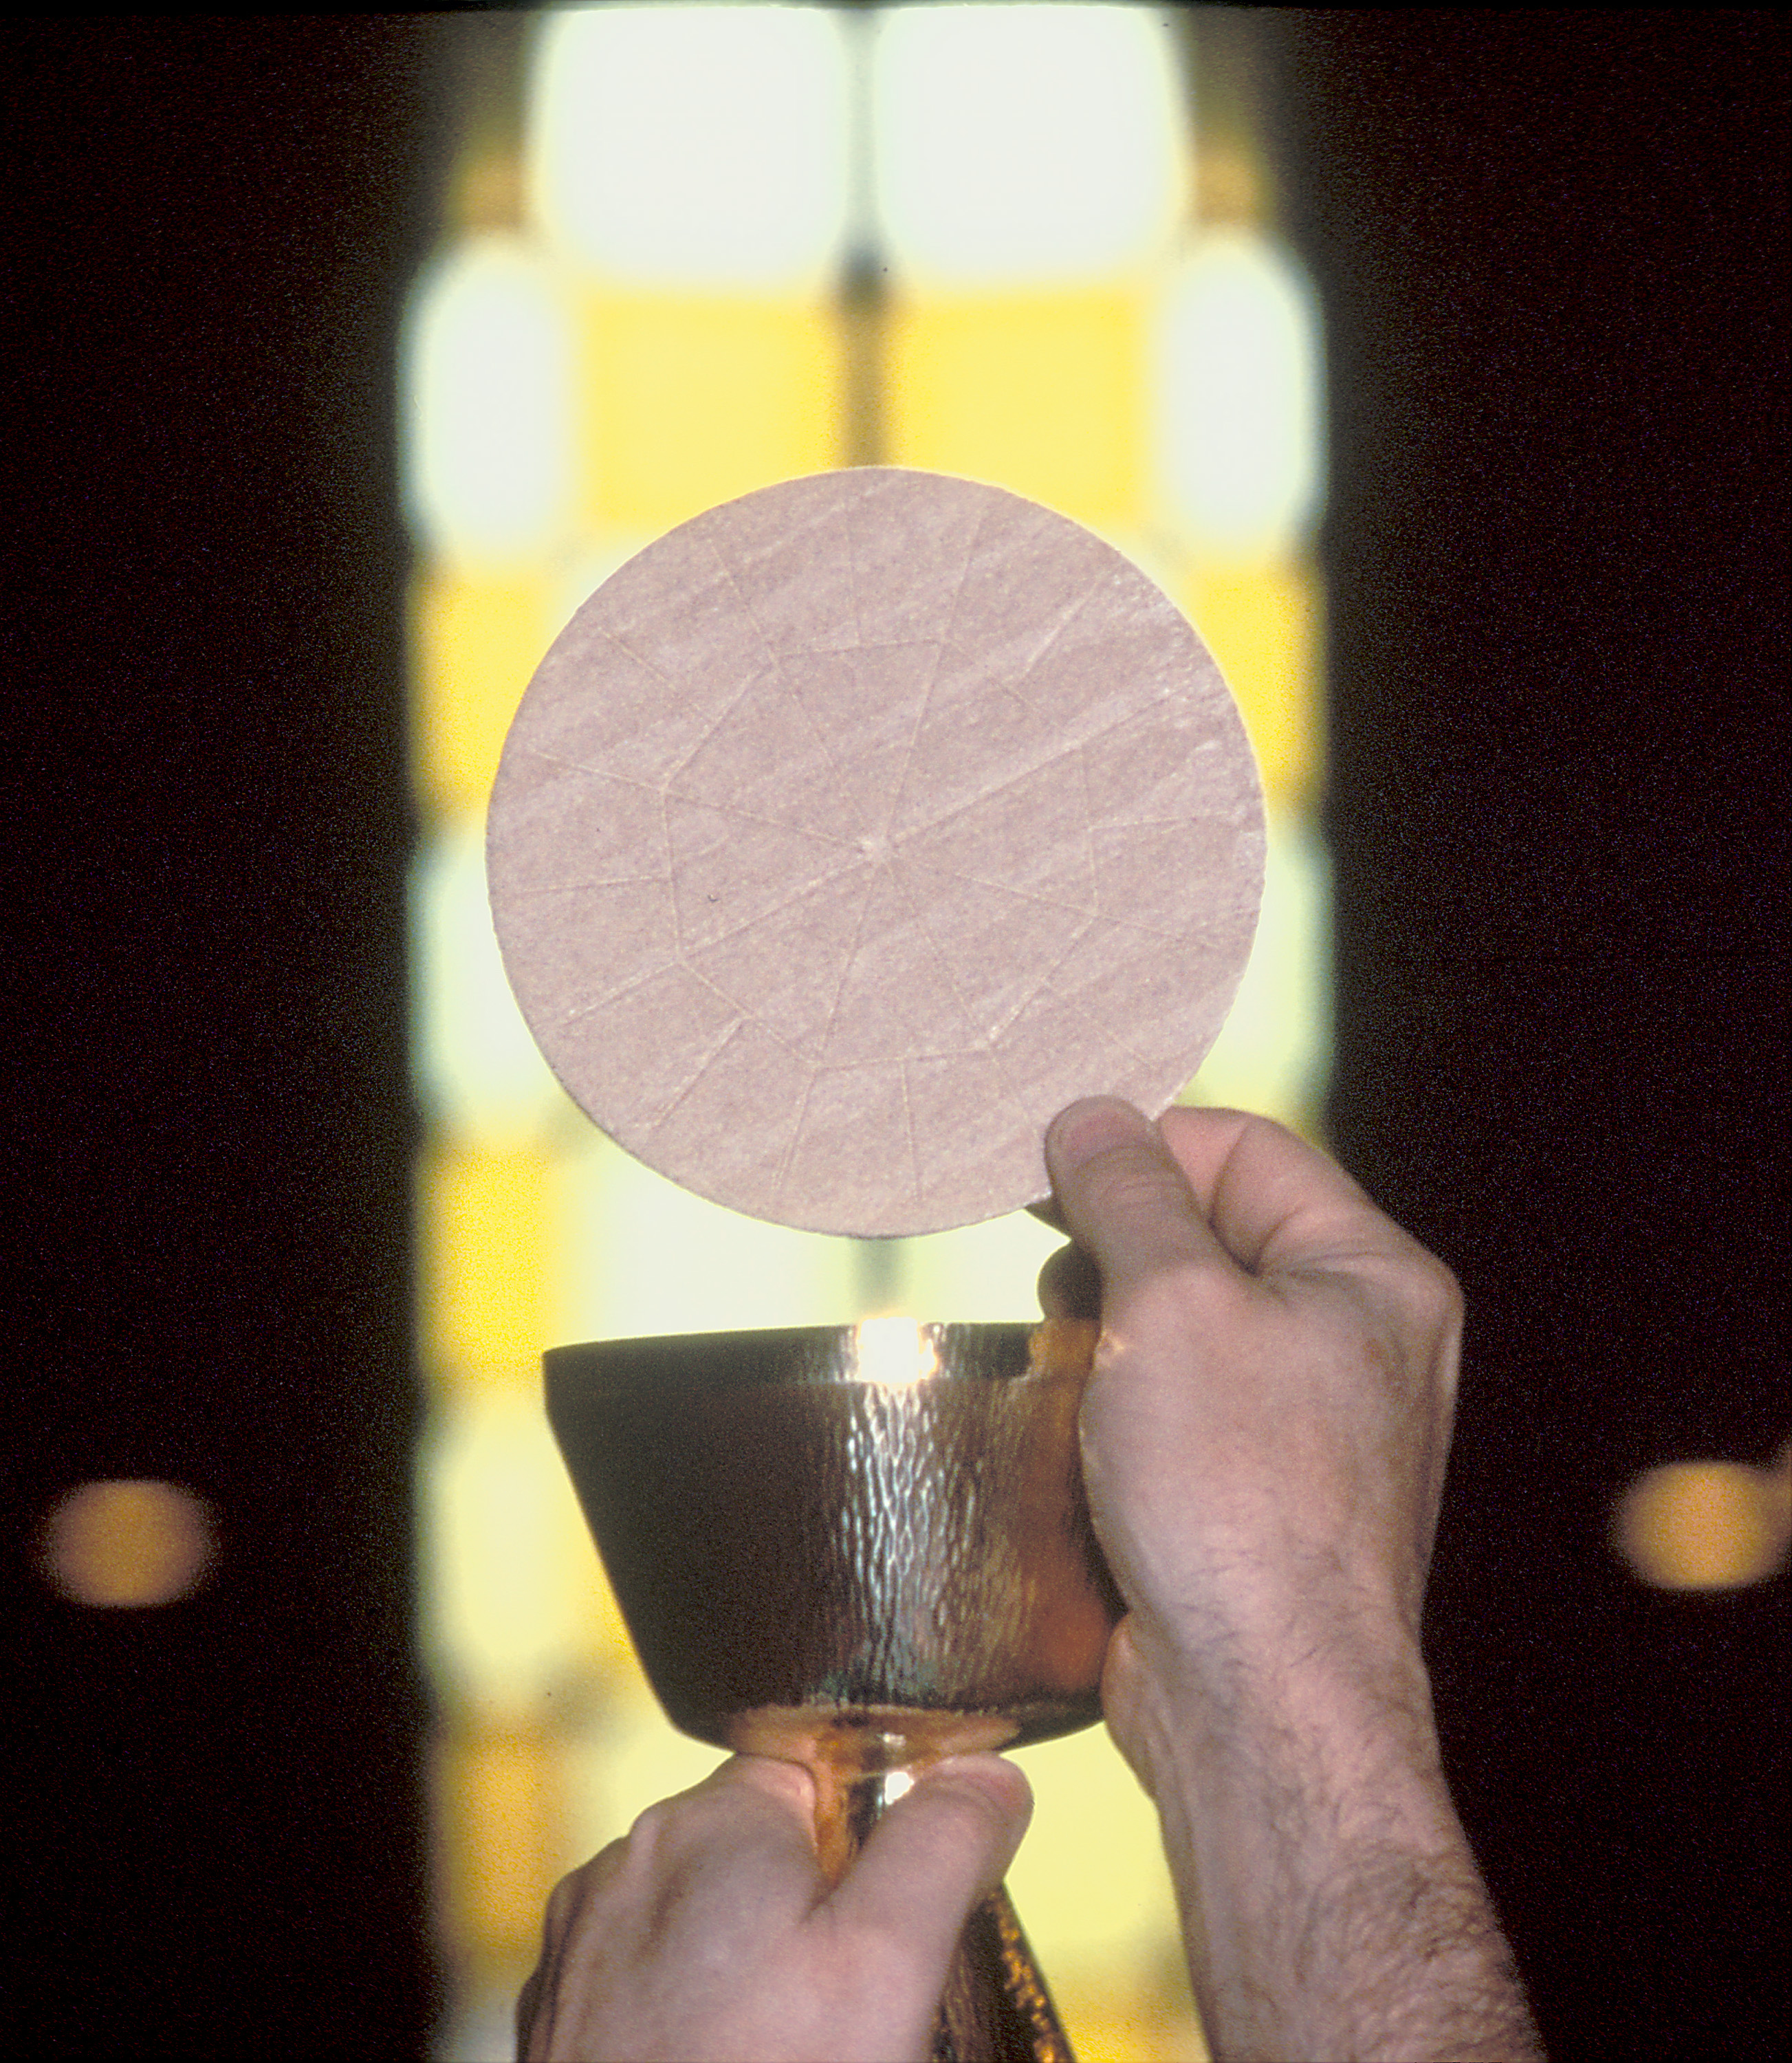 The Eucharist being held up by a priest in front of a stained glass window